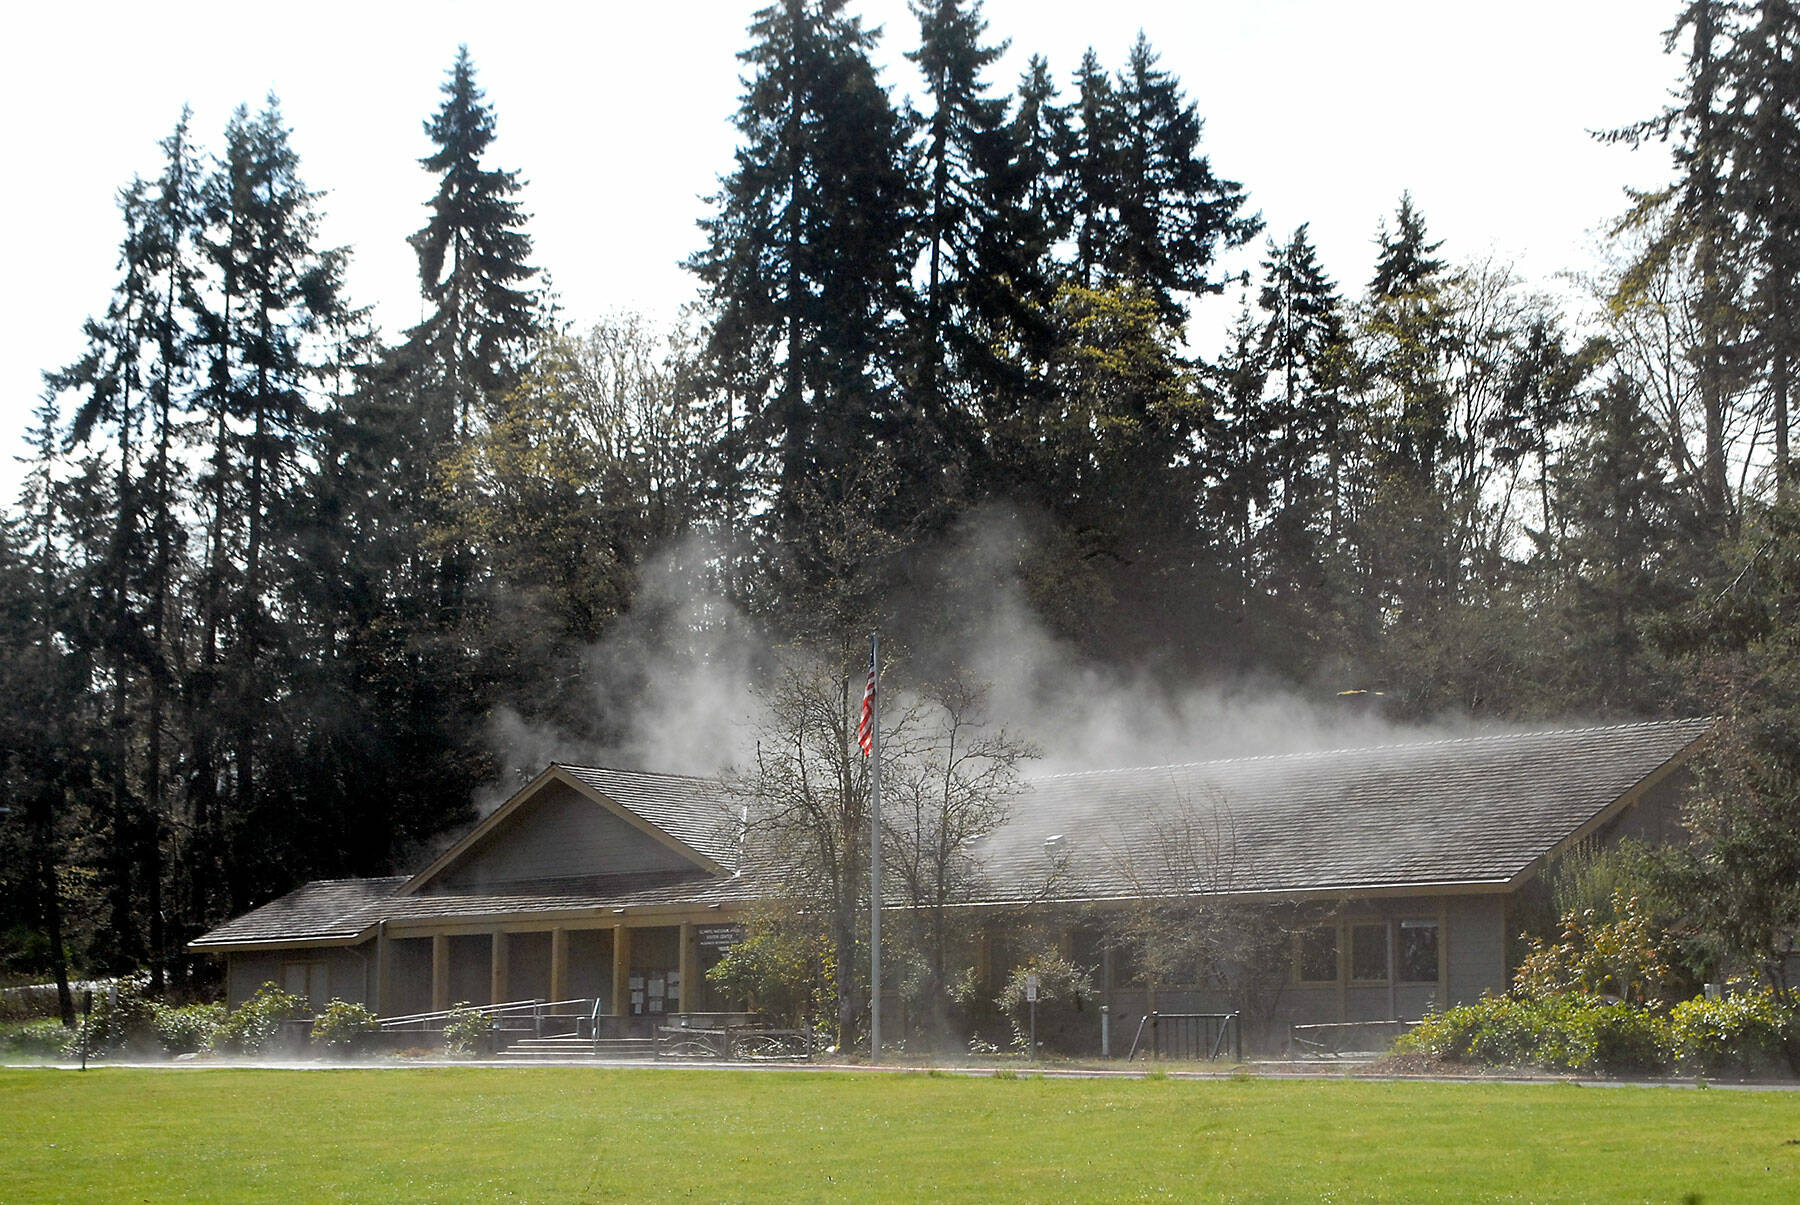 Steam rises from the roof and front driveway of the Olympic National Park Visitor Center on Thursday in Port Angeles after direct sunlight reached its rain-drenched shingles. (Keith Thorpe/Peninsula Daily News)